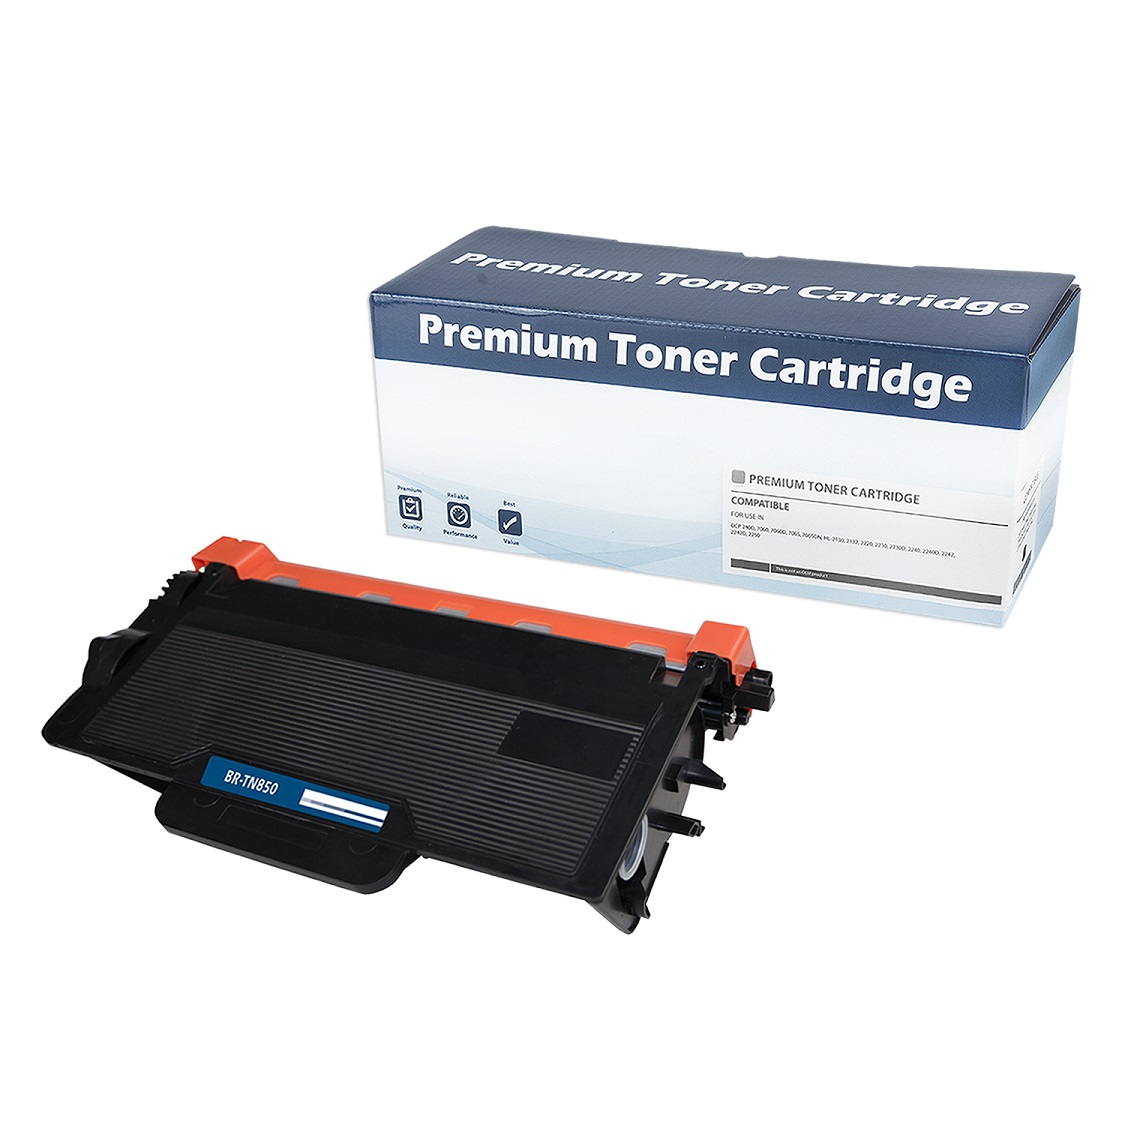 2 PACK COMPATIBLE BROTHER TN660 TONER CTG, BLACK, 2.6K HIGH YIELD